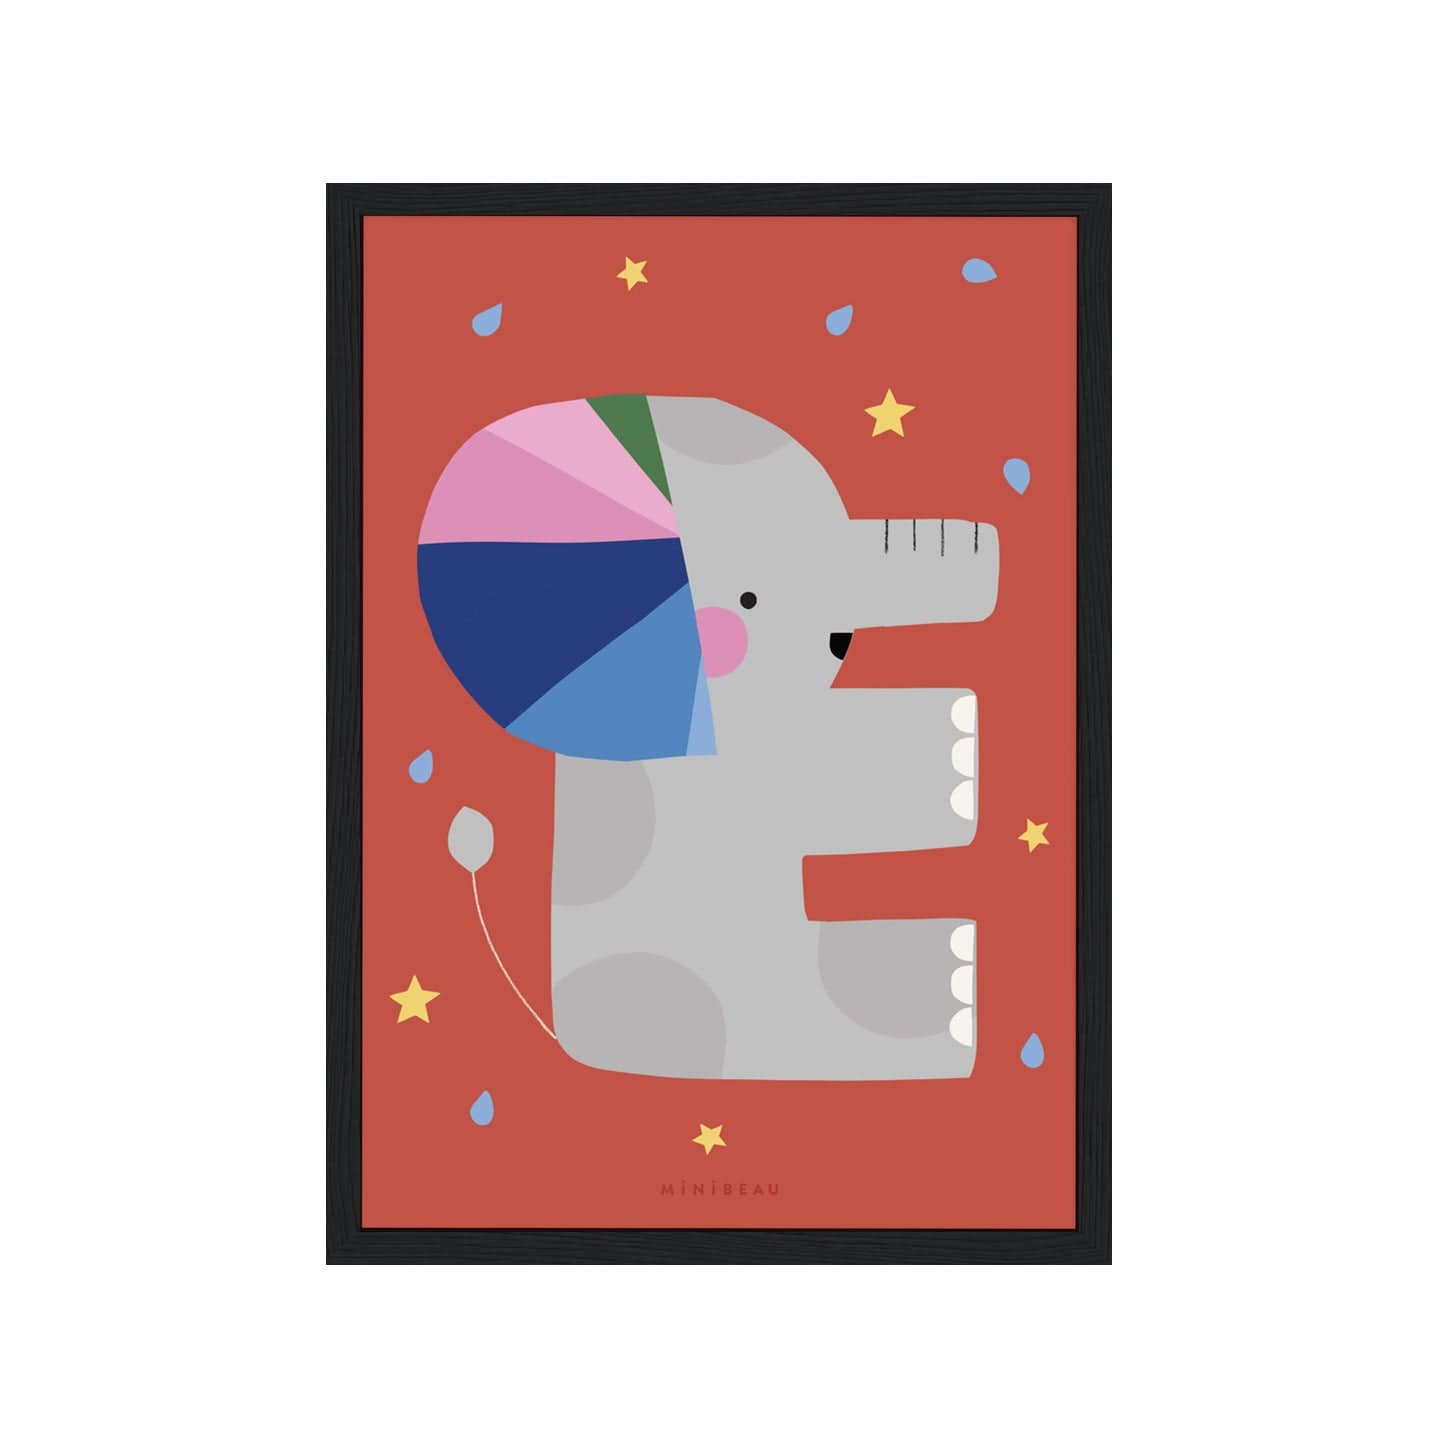 Art print in black frame. Our Happy Alphabet 'E' Art Print shows a grey elephant in the shape of an E with a rainbow coloured ear on a red background with water drops and stars.